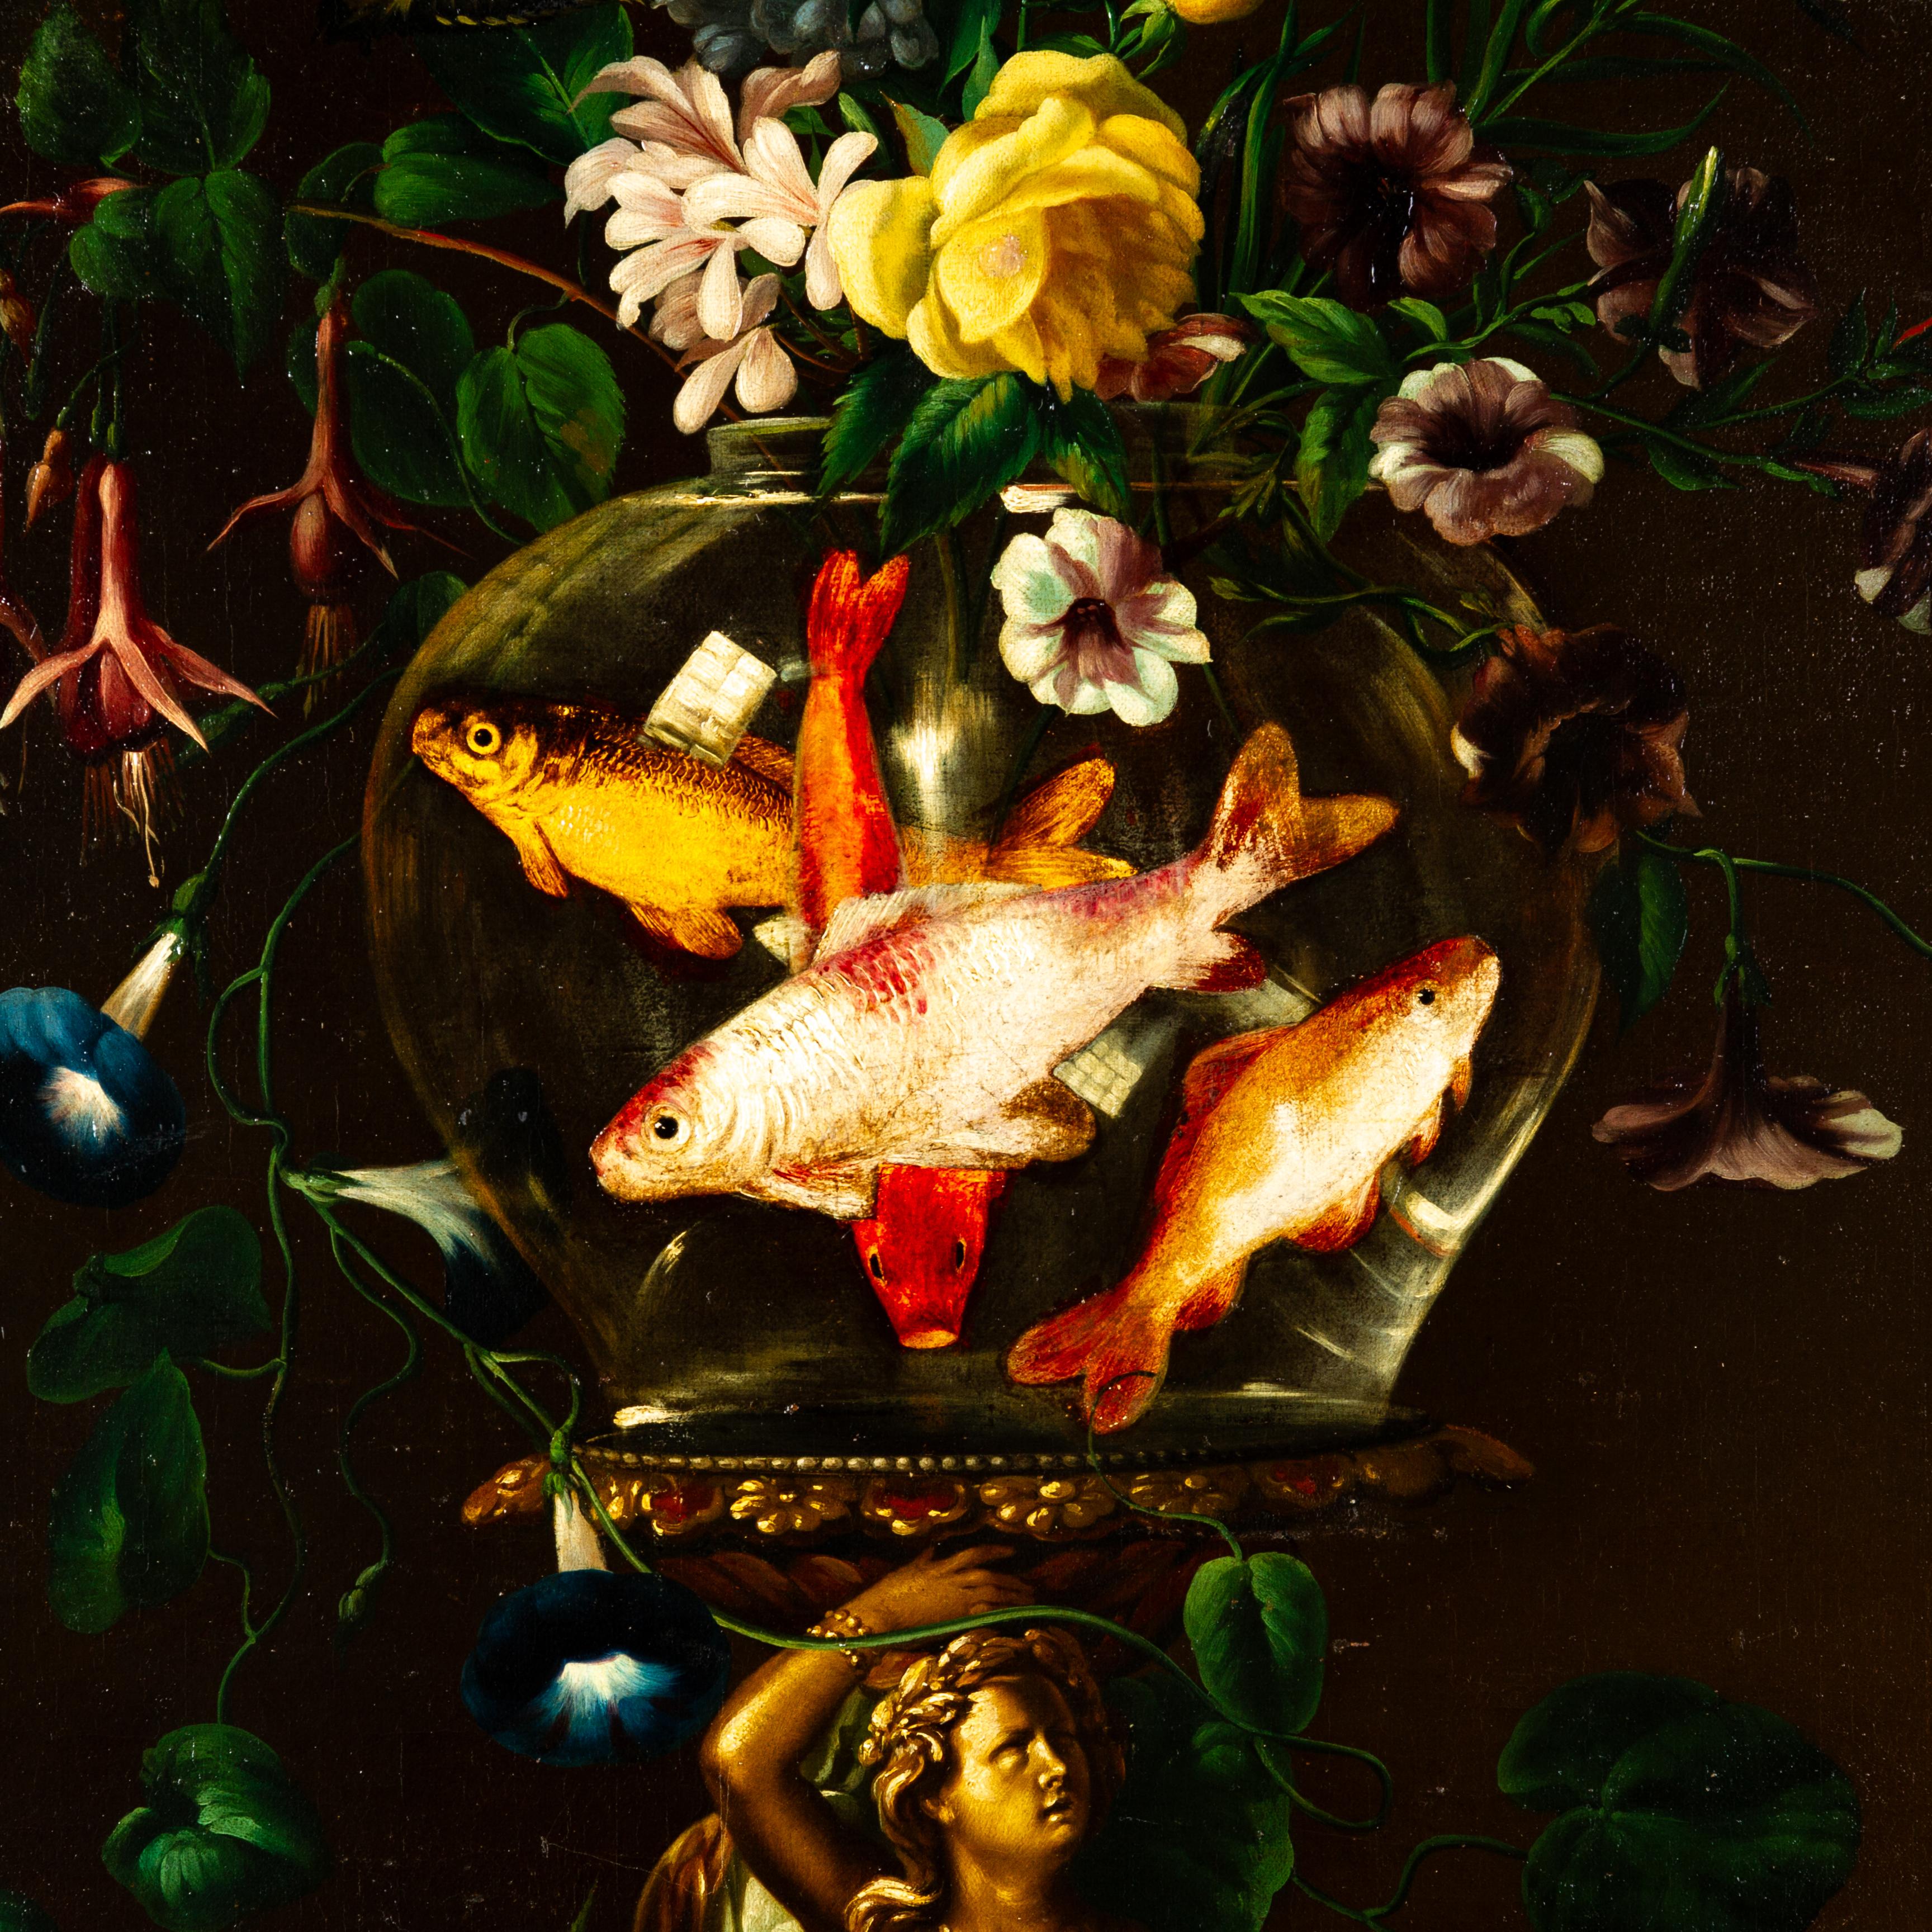 An exceptional 18th century old master oil painting depicting a very fine floral still life of goldfish. 

Provenance: an important private collection
Good condition overall, ready to hang
Free international shipping.